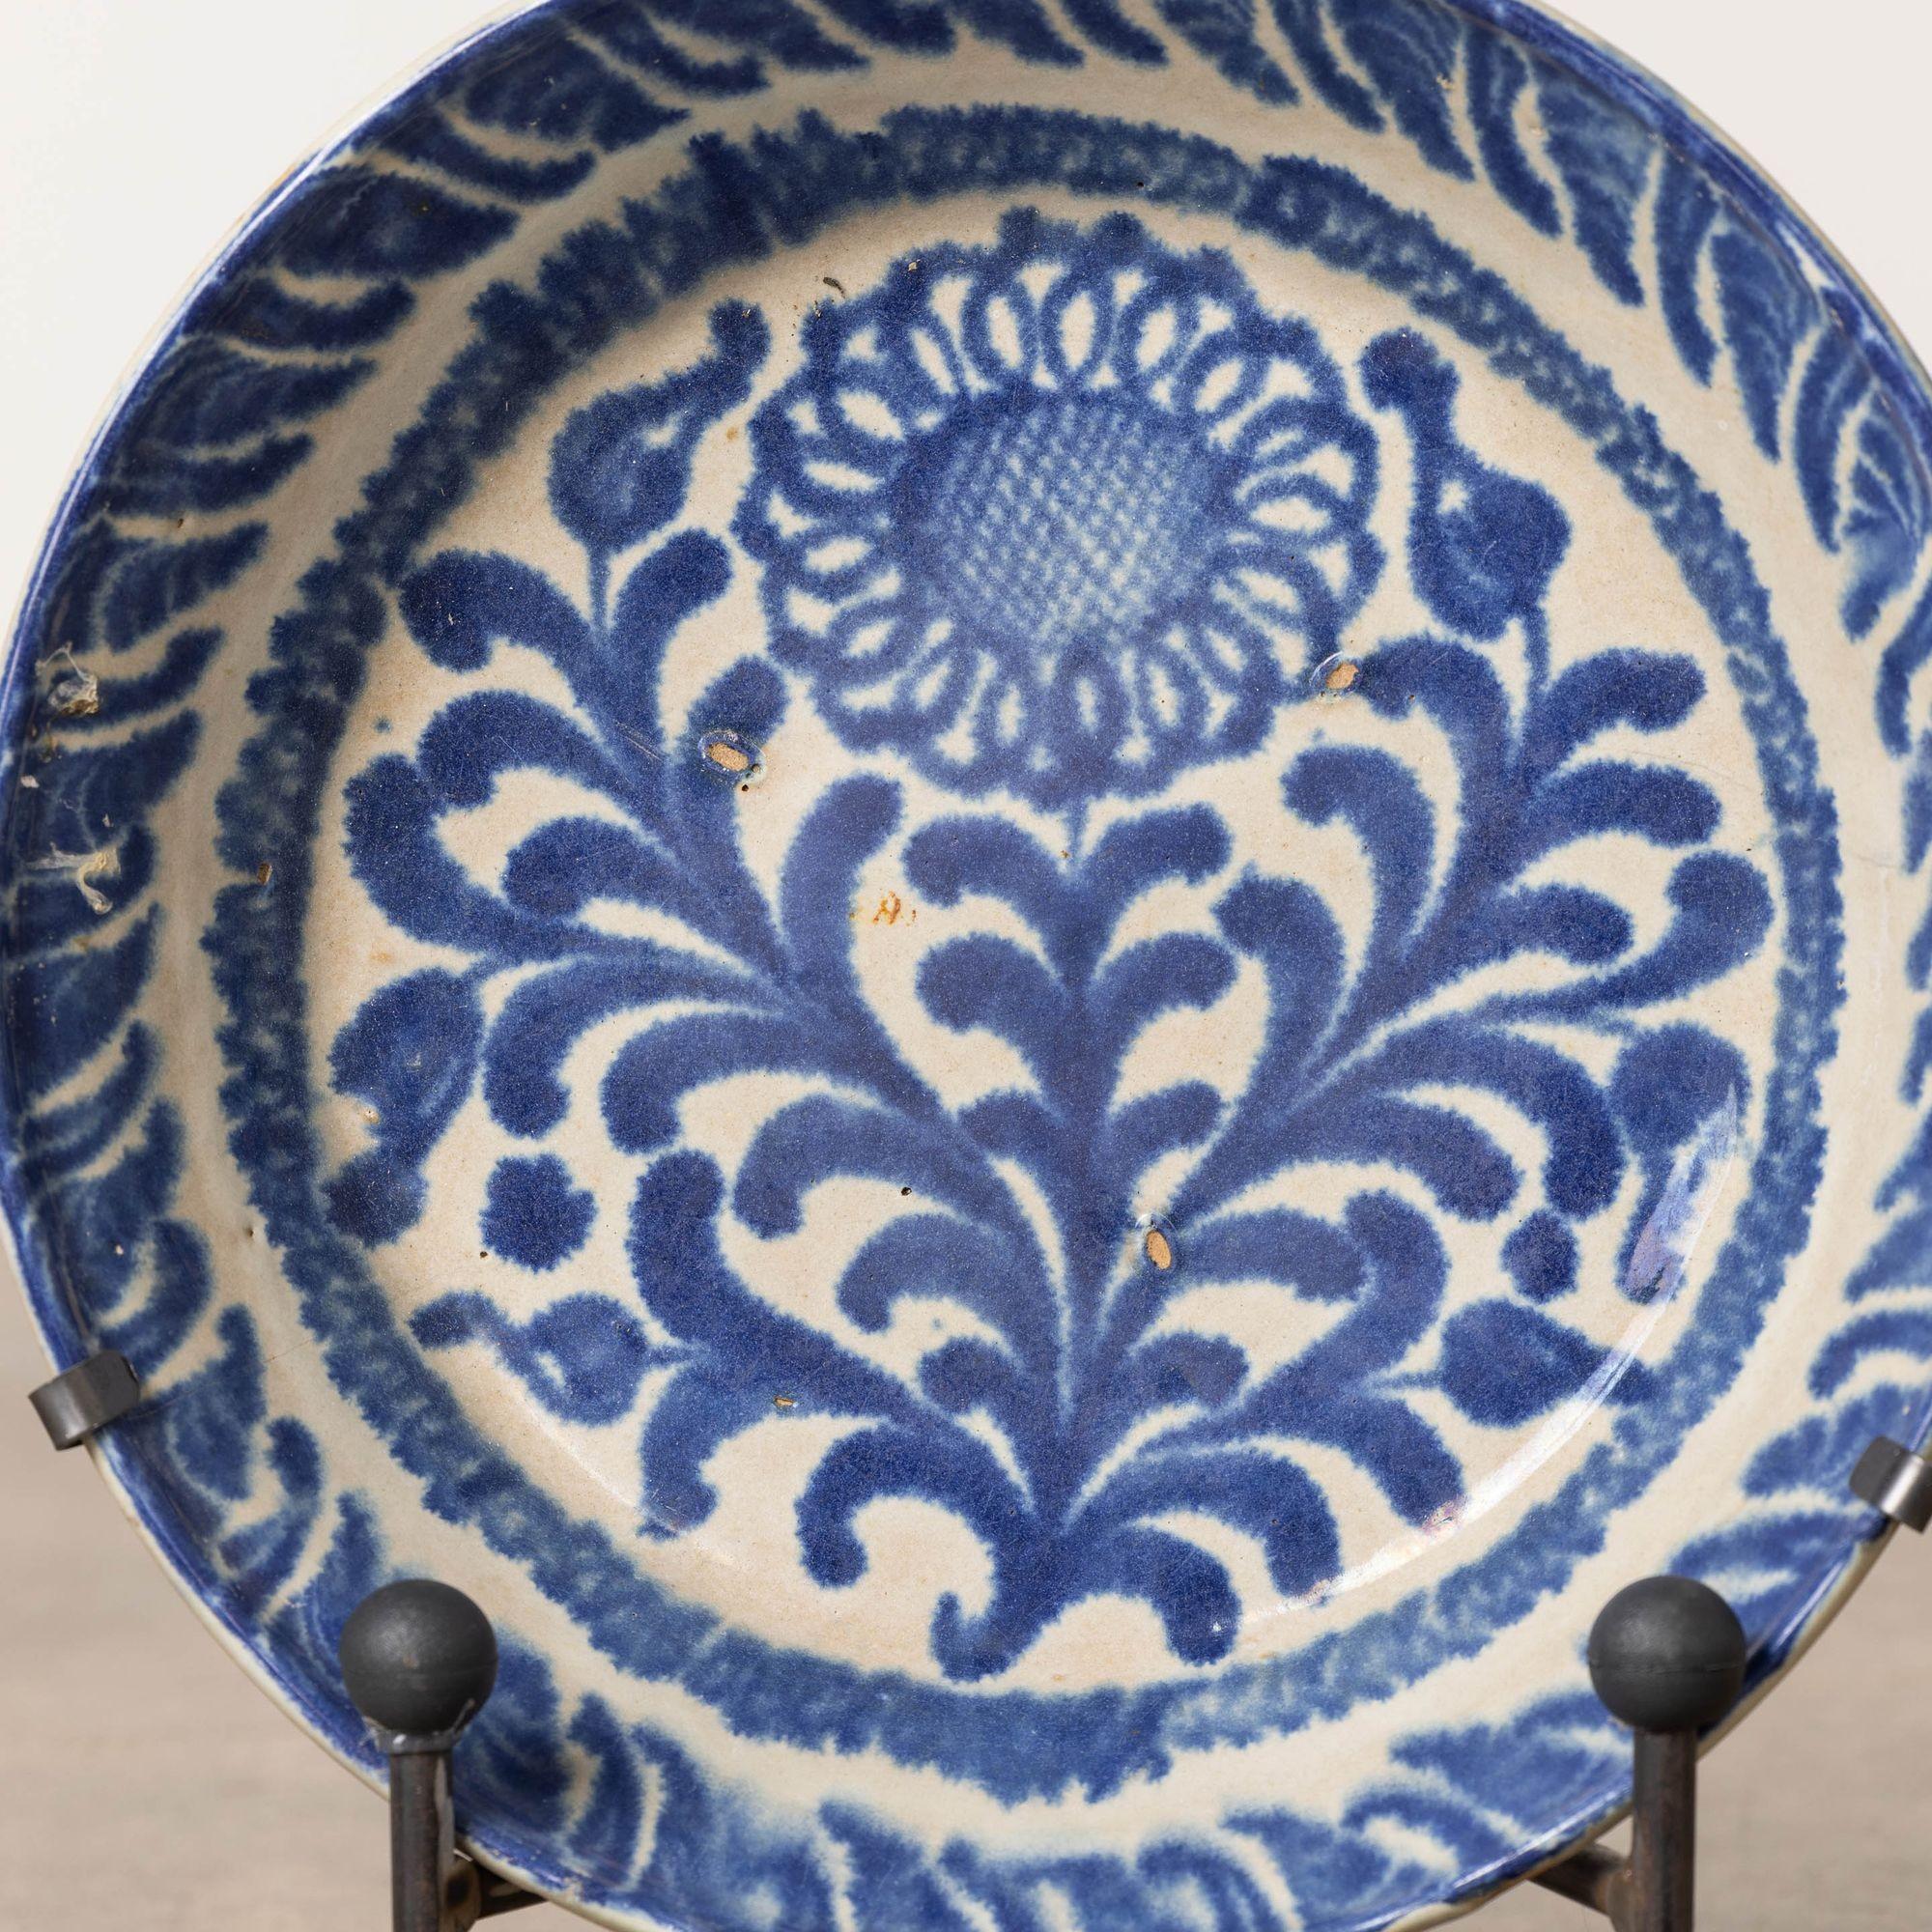 19th c. earthenware bowl from Granada, Spain painted in blue over a milk-white glaze. This deep bowl features a hand-painted floral and leaf motif on the bottom of the bowl with decorative sides. Sold with both a hand-forged iron stand and